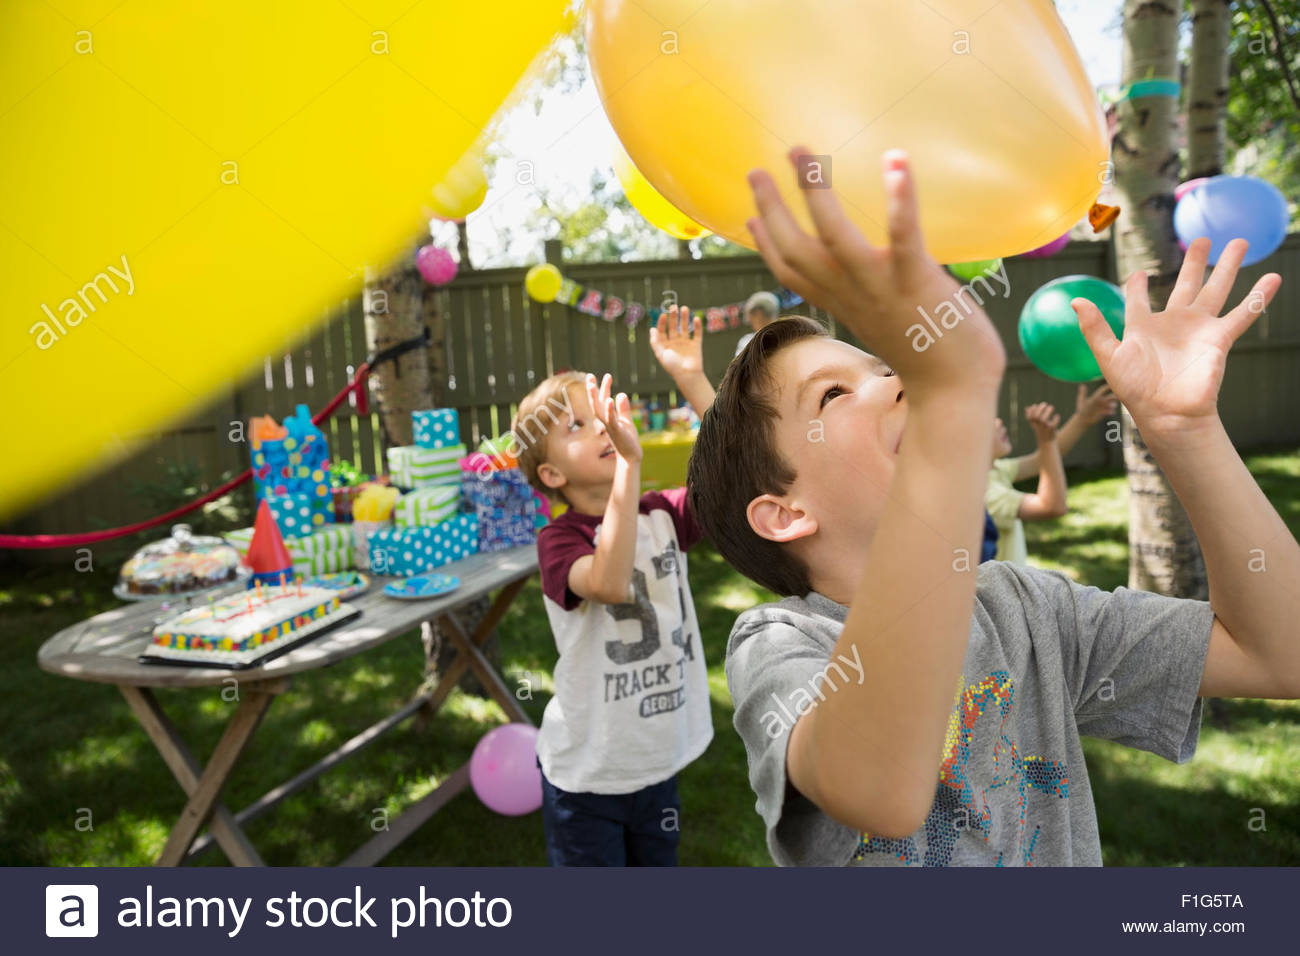 Boys playing with balloons at backyard birthday party Stock Photo